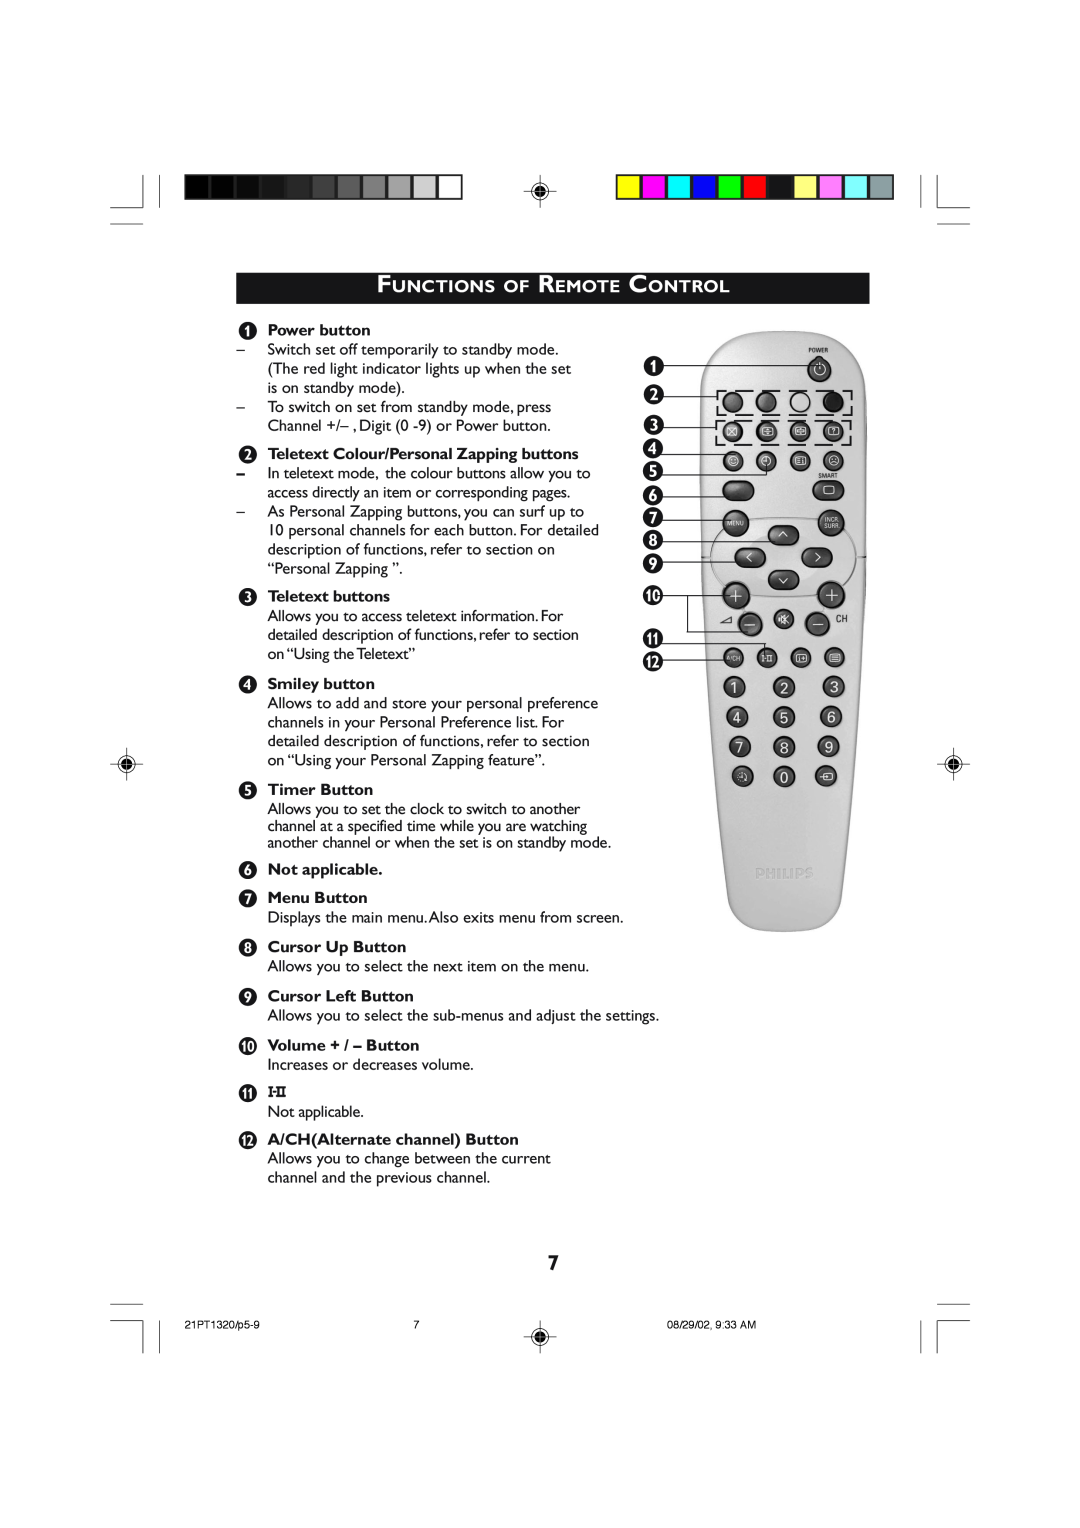 Philips 21PT1320 operating instructions Functions Of Remote, Control, é “ ‘ 